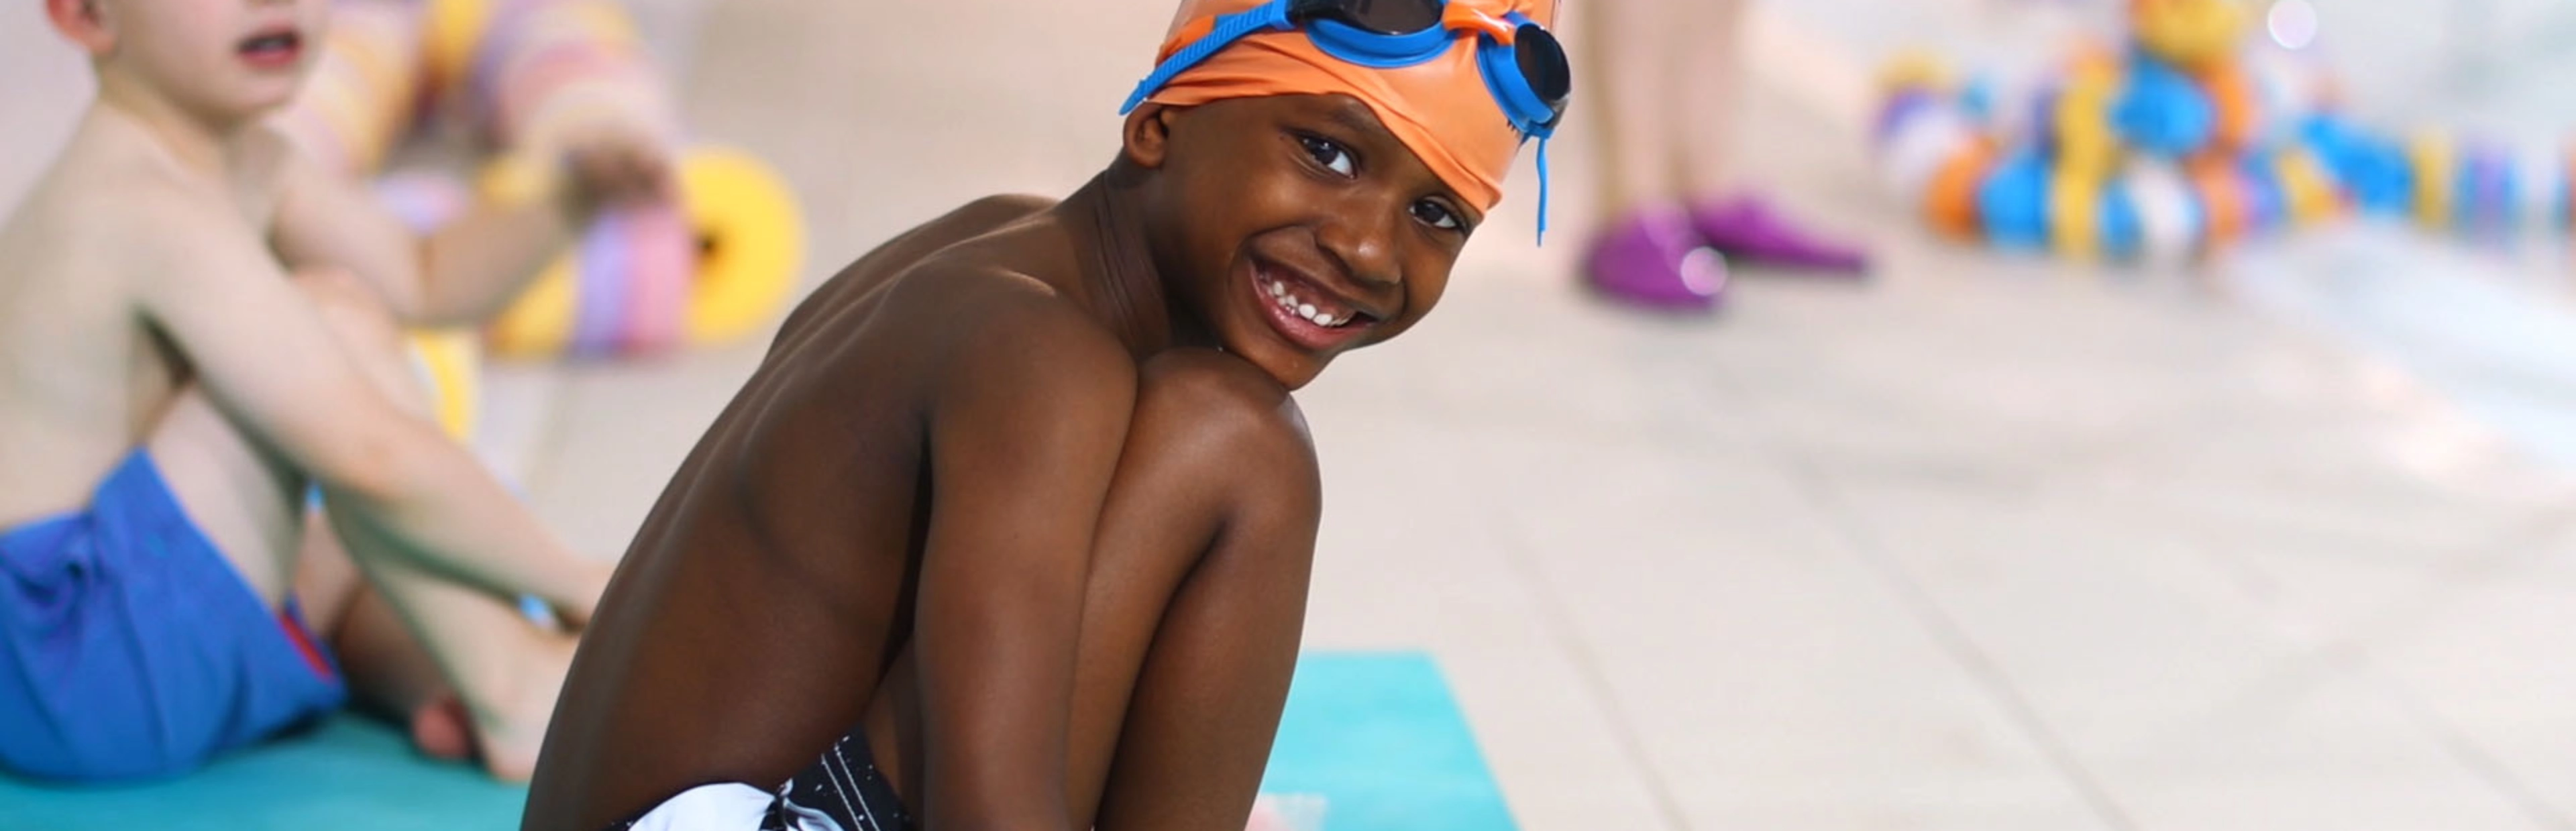 Importance of returning to swimming lessons